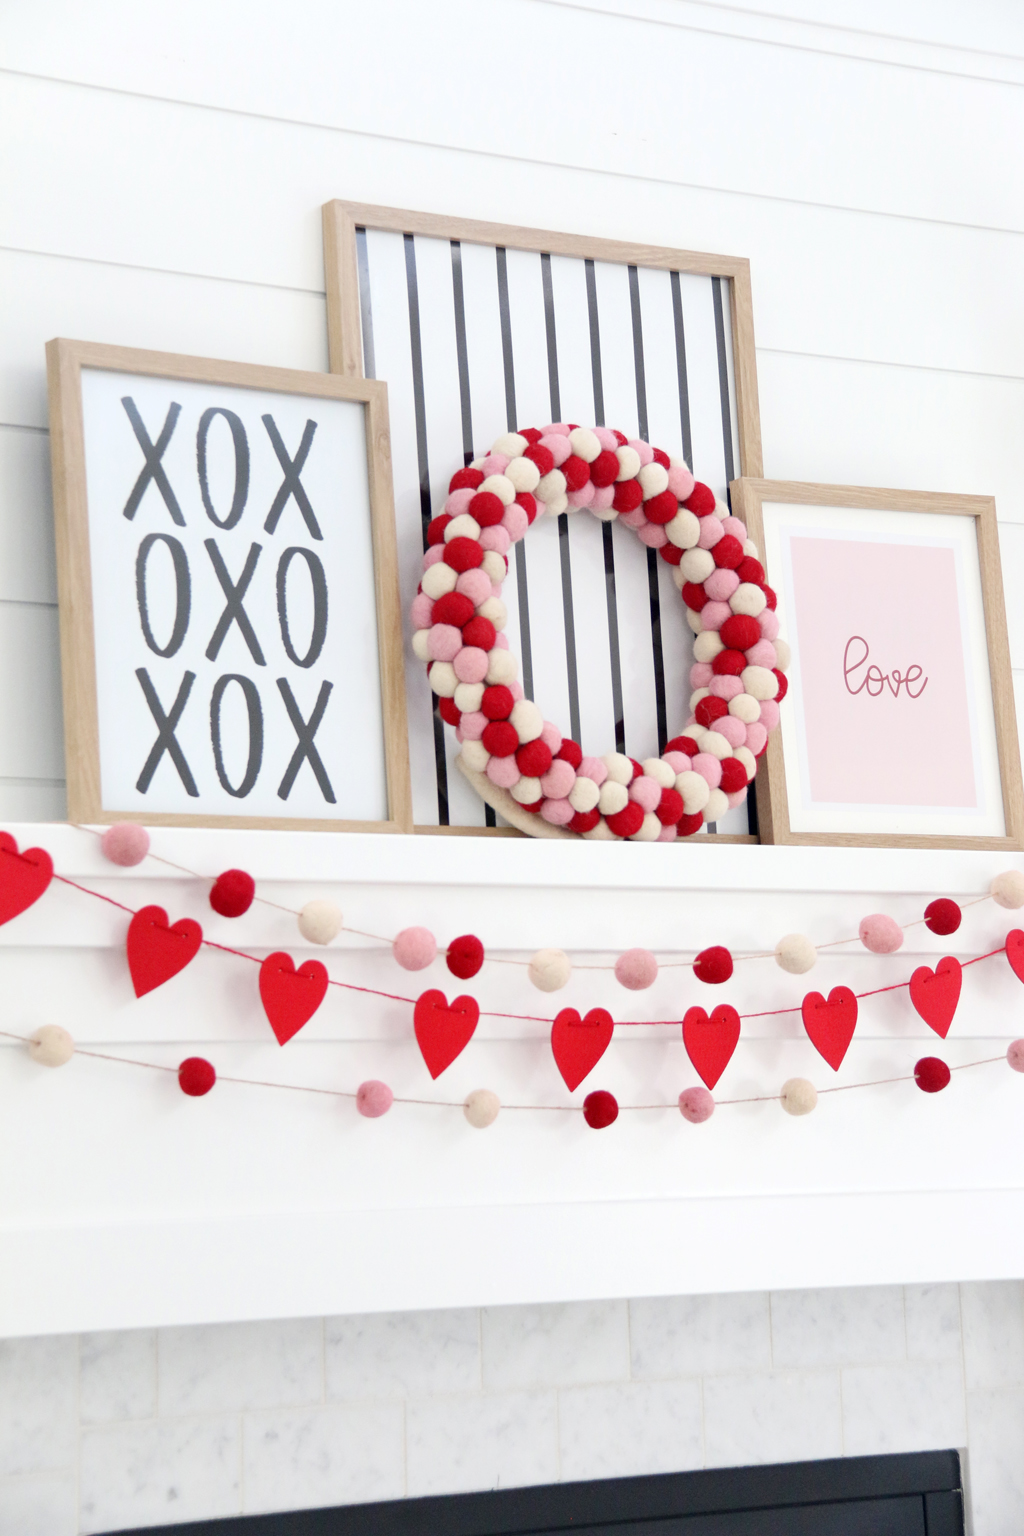 White mantle with red heart banner and pink, red, and white pom pom banner. Three pictures in frames one with XOXO in black and white, one with black and white stripes, and one with Pink background and the word "Love" in red.